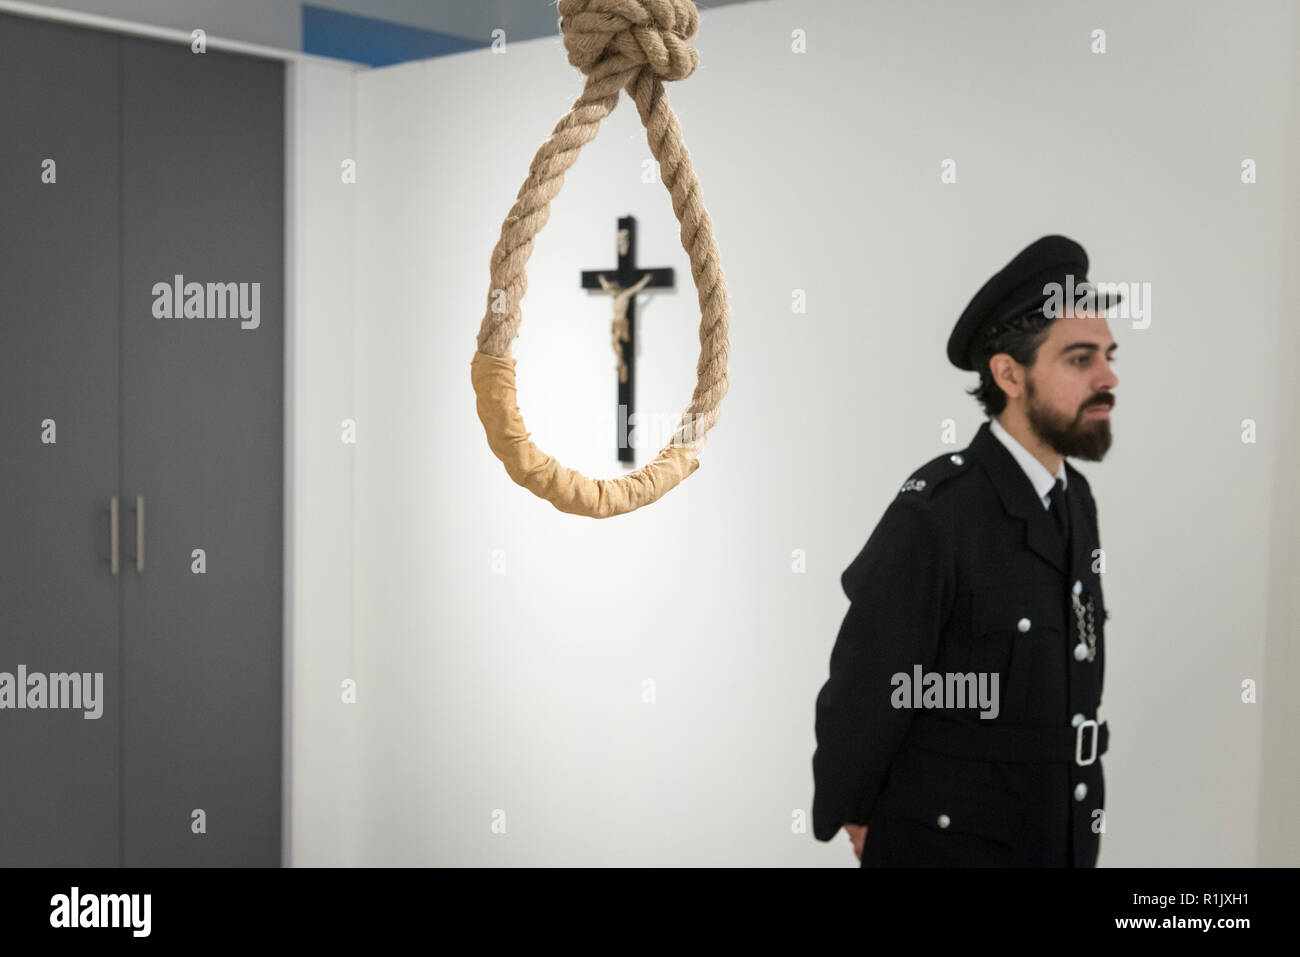 London, UK.  13 November 2018. A staff member, posing as a prison guard, views a hangman's noose.  Preview of 'Glad I Did It', a new work by Irish artist Christina Reihill at Bermondsey Project Space.  The interactive artwork looks at the life and death of Ruth Ellis, the last woman to be hanged in Britain, after she shot her lover, racing driver, David Blakely in 1955.  On display are the artist's interpretation of Ruth Ellis' prison cell, including furniture and props, the hanging room together with a video display of the artist in conversation. Credit: Stephen Chung/Alamy Live News Stock Photo